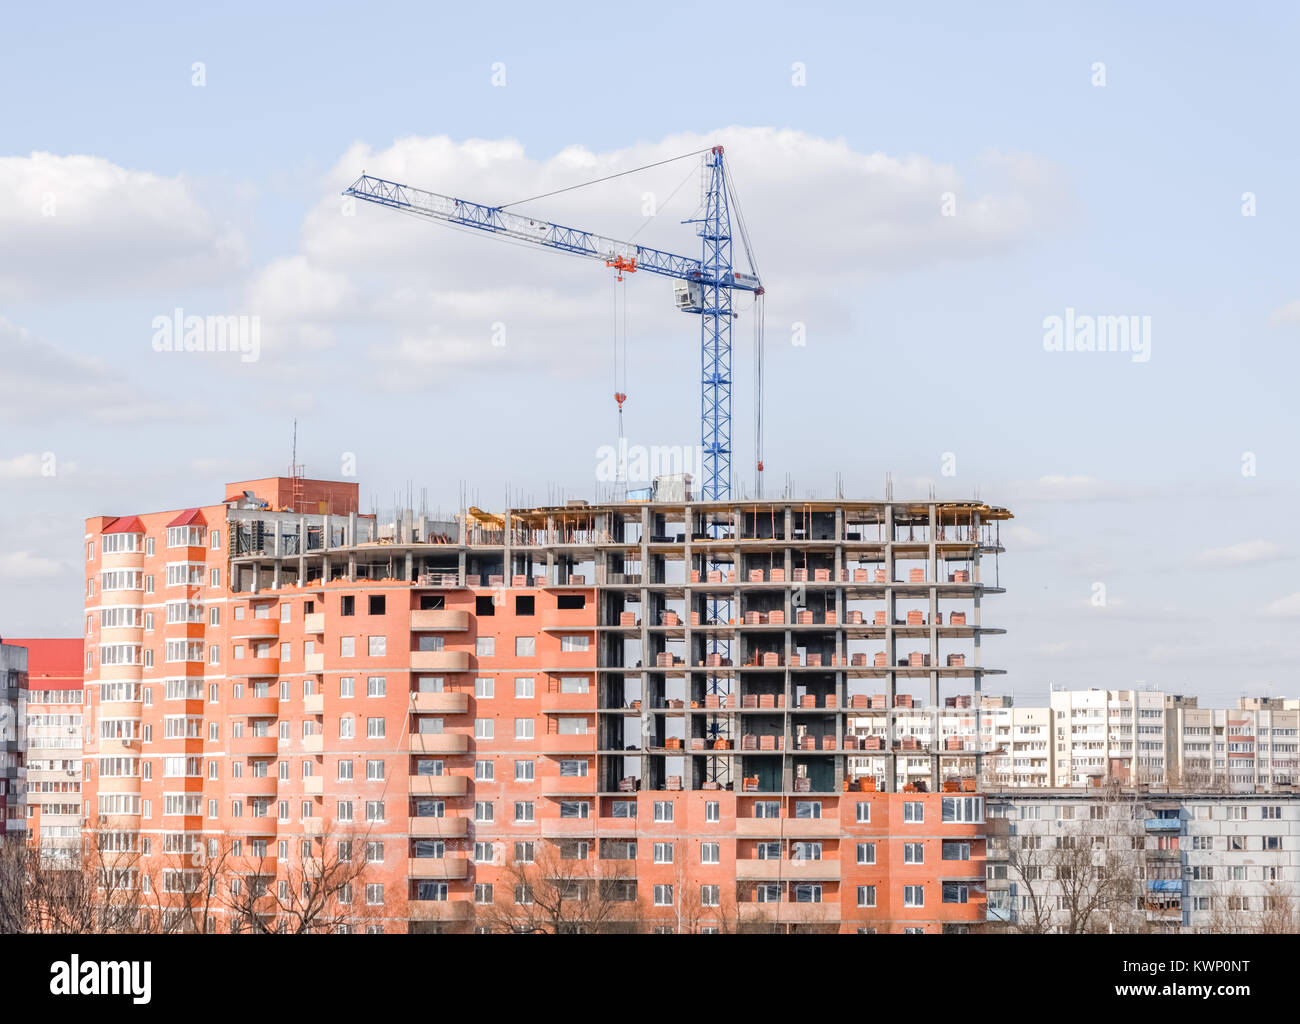 crane against a new block of flats, new multi-storey house. Stock Photo